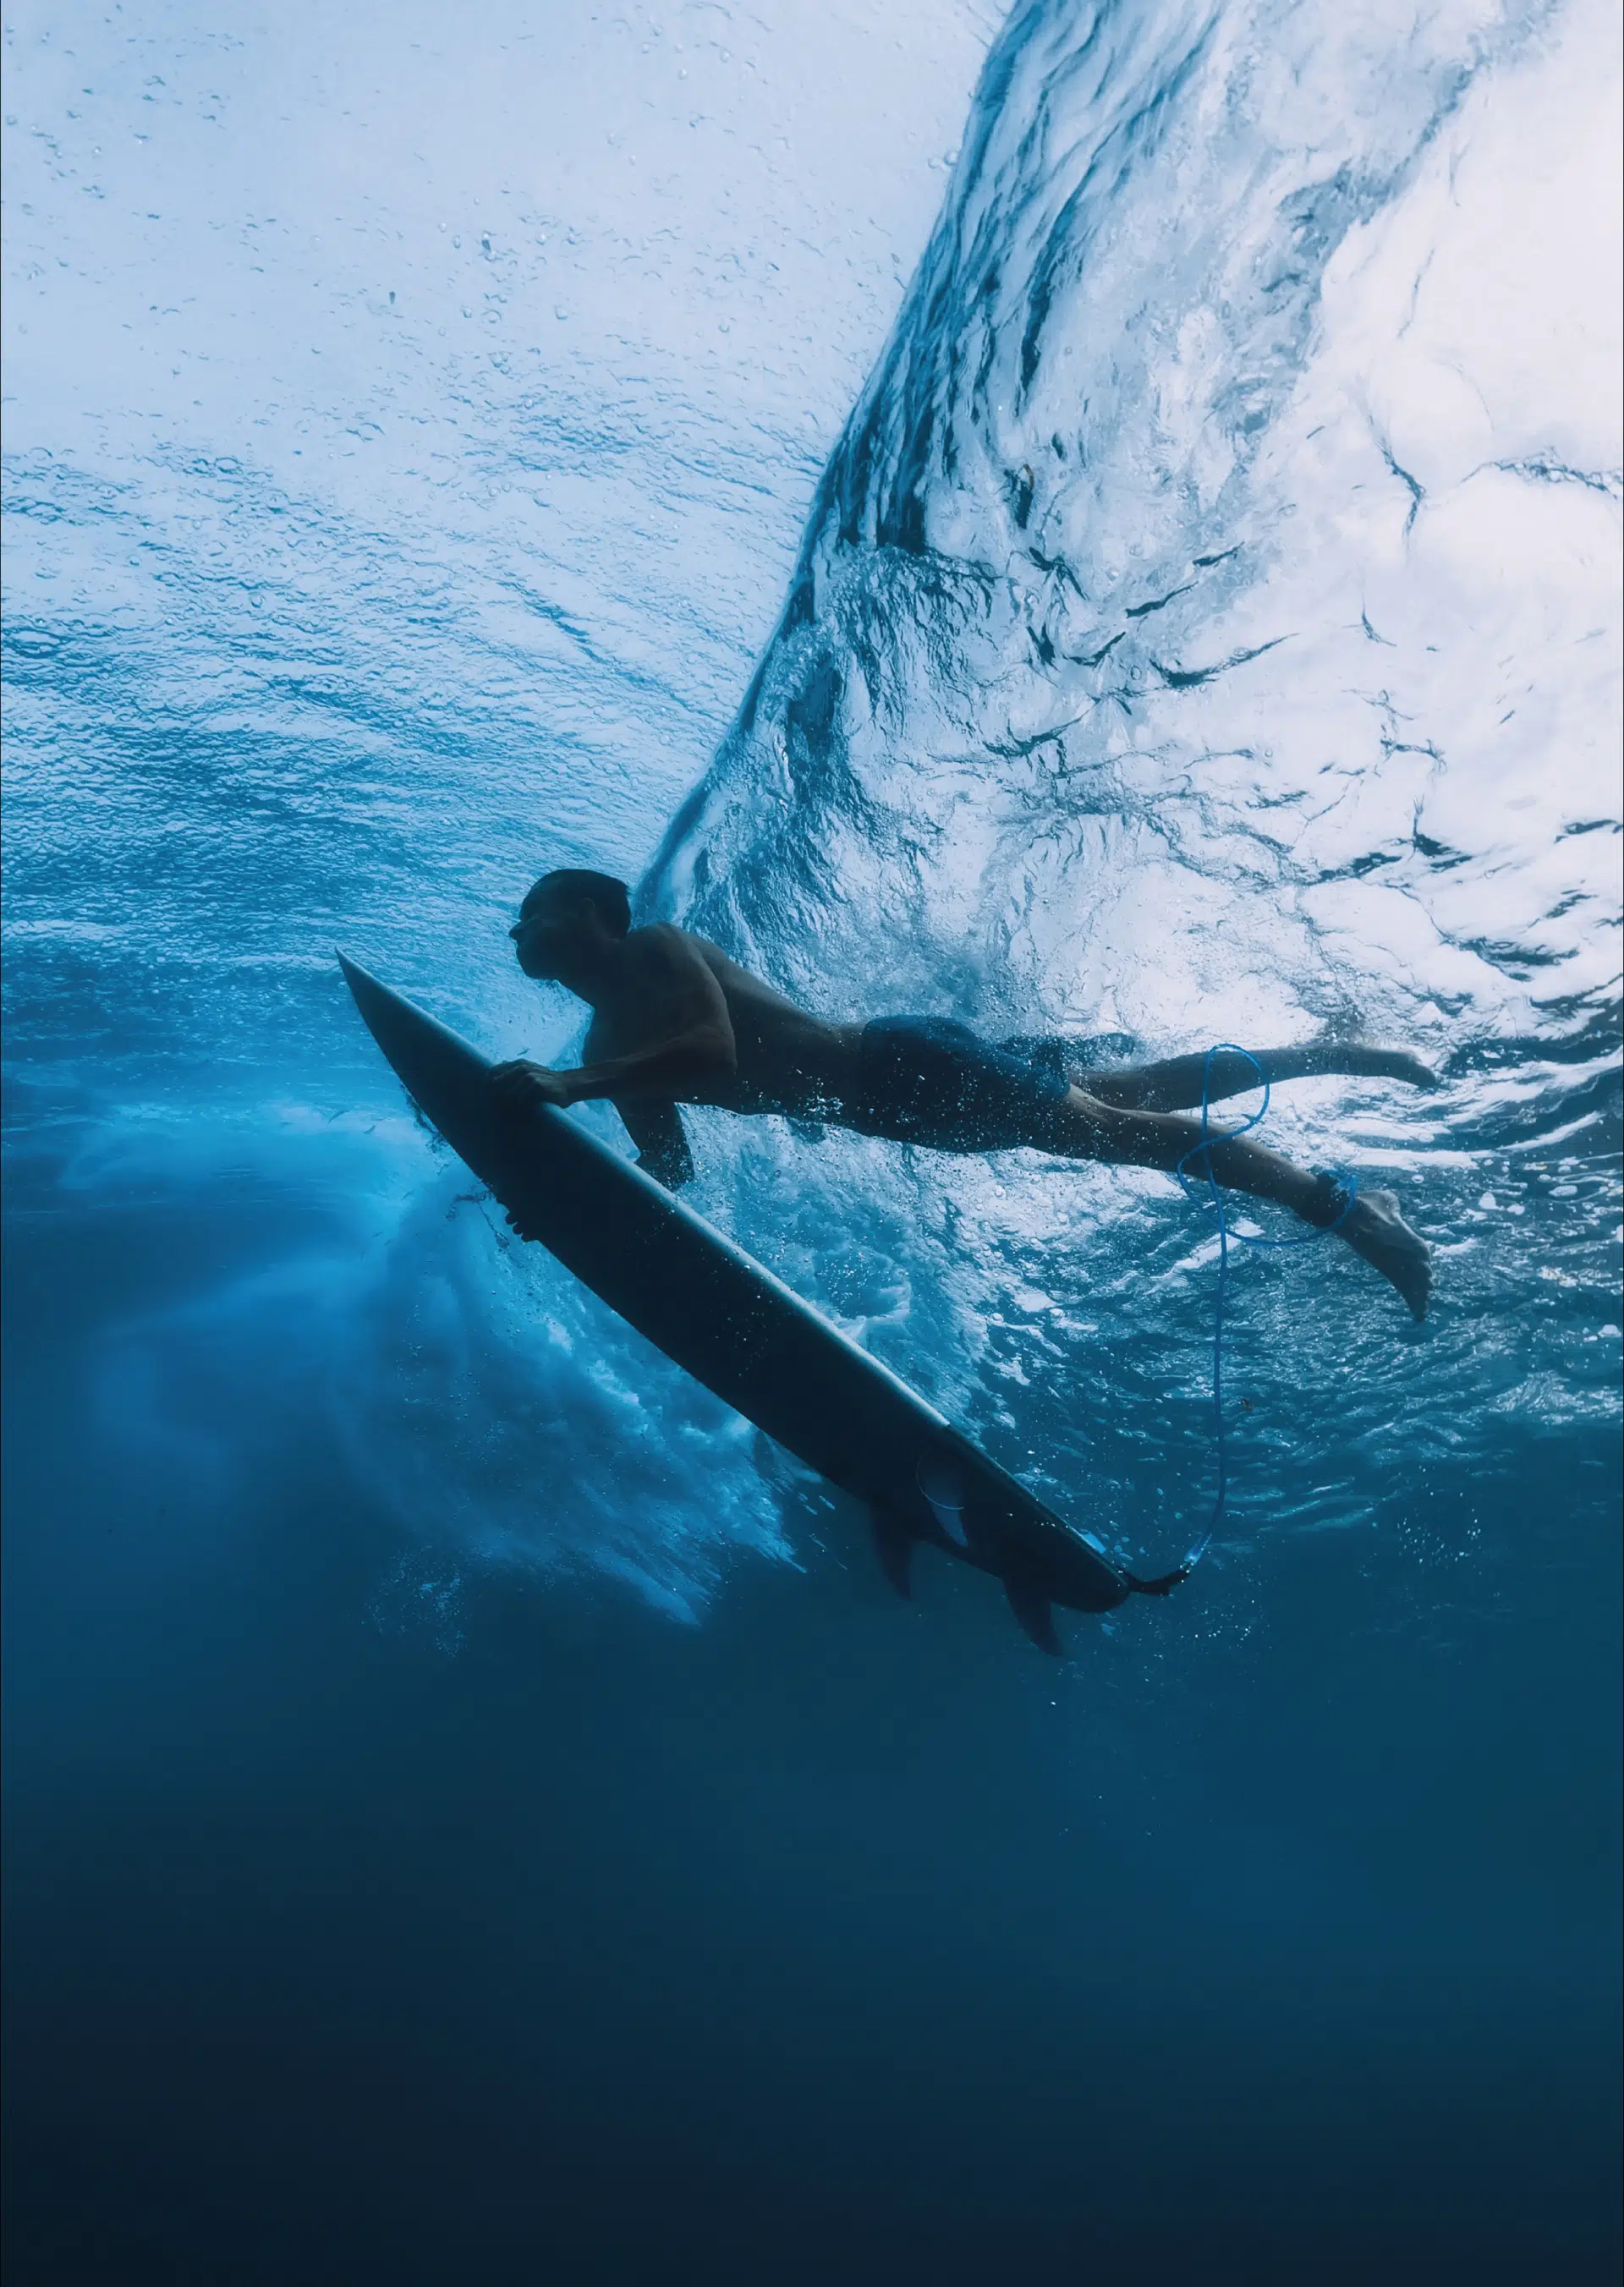 Man surfing in the waves - webbiz digital services - work made for realadventures.ie